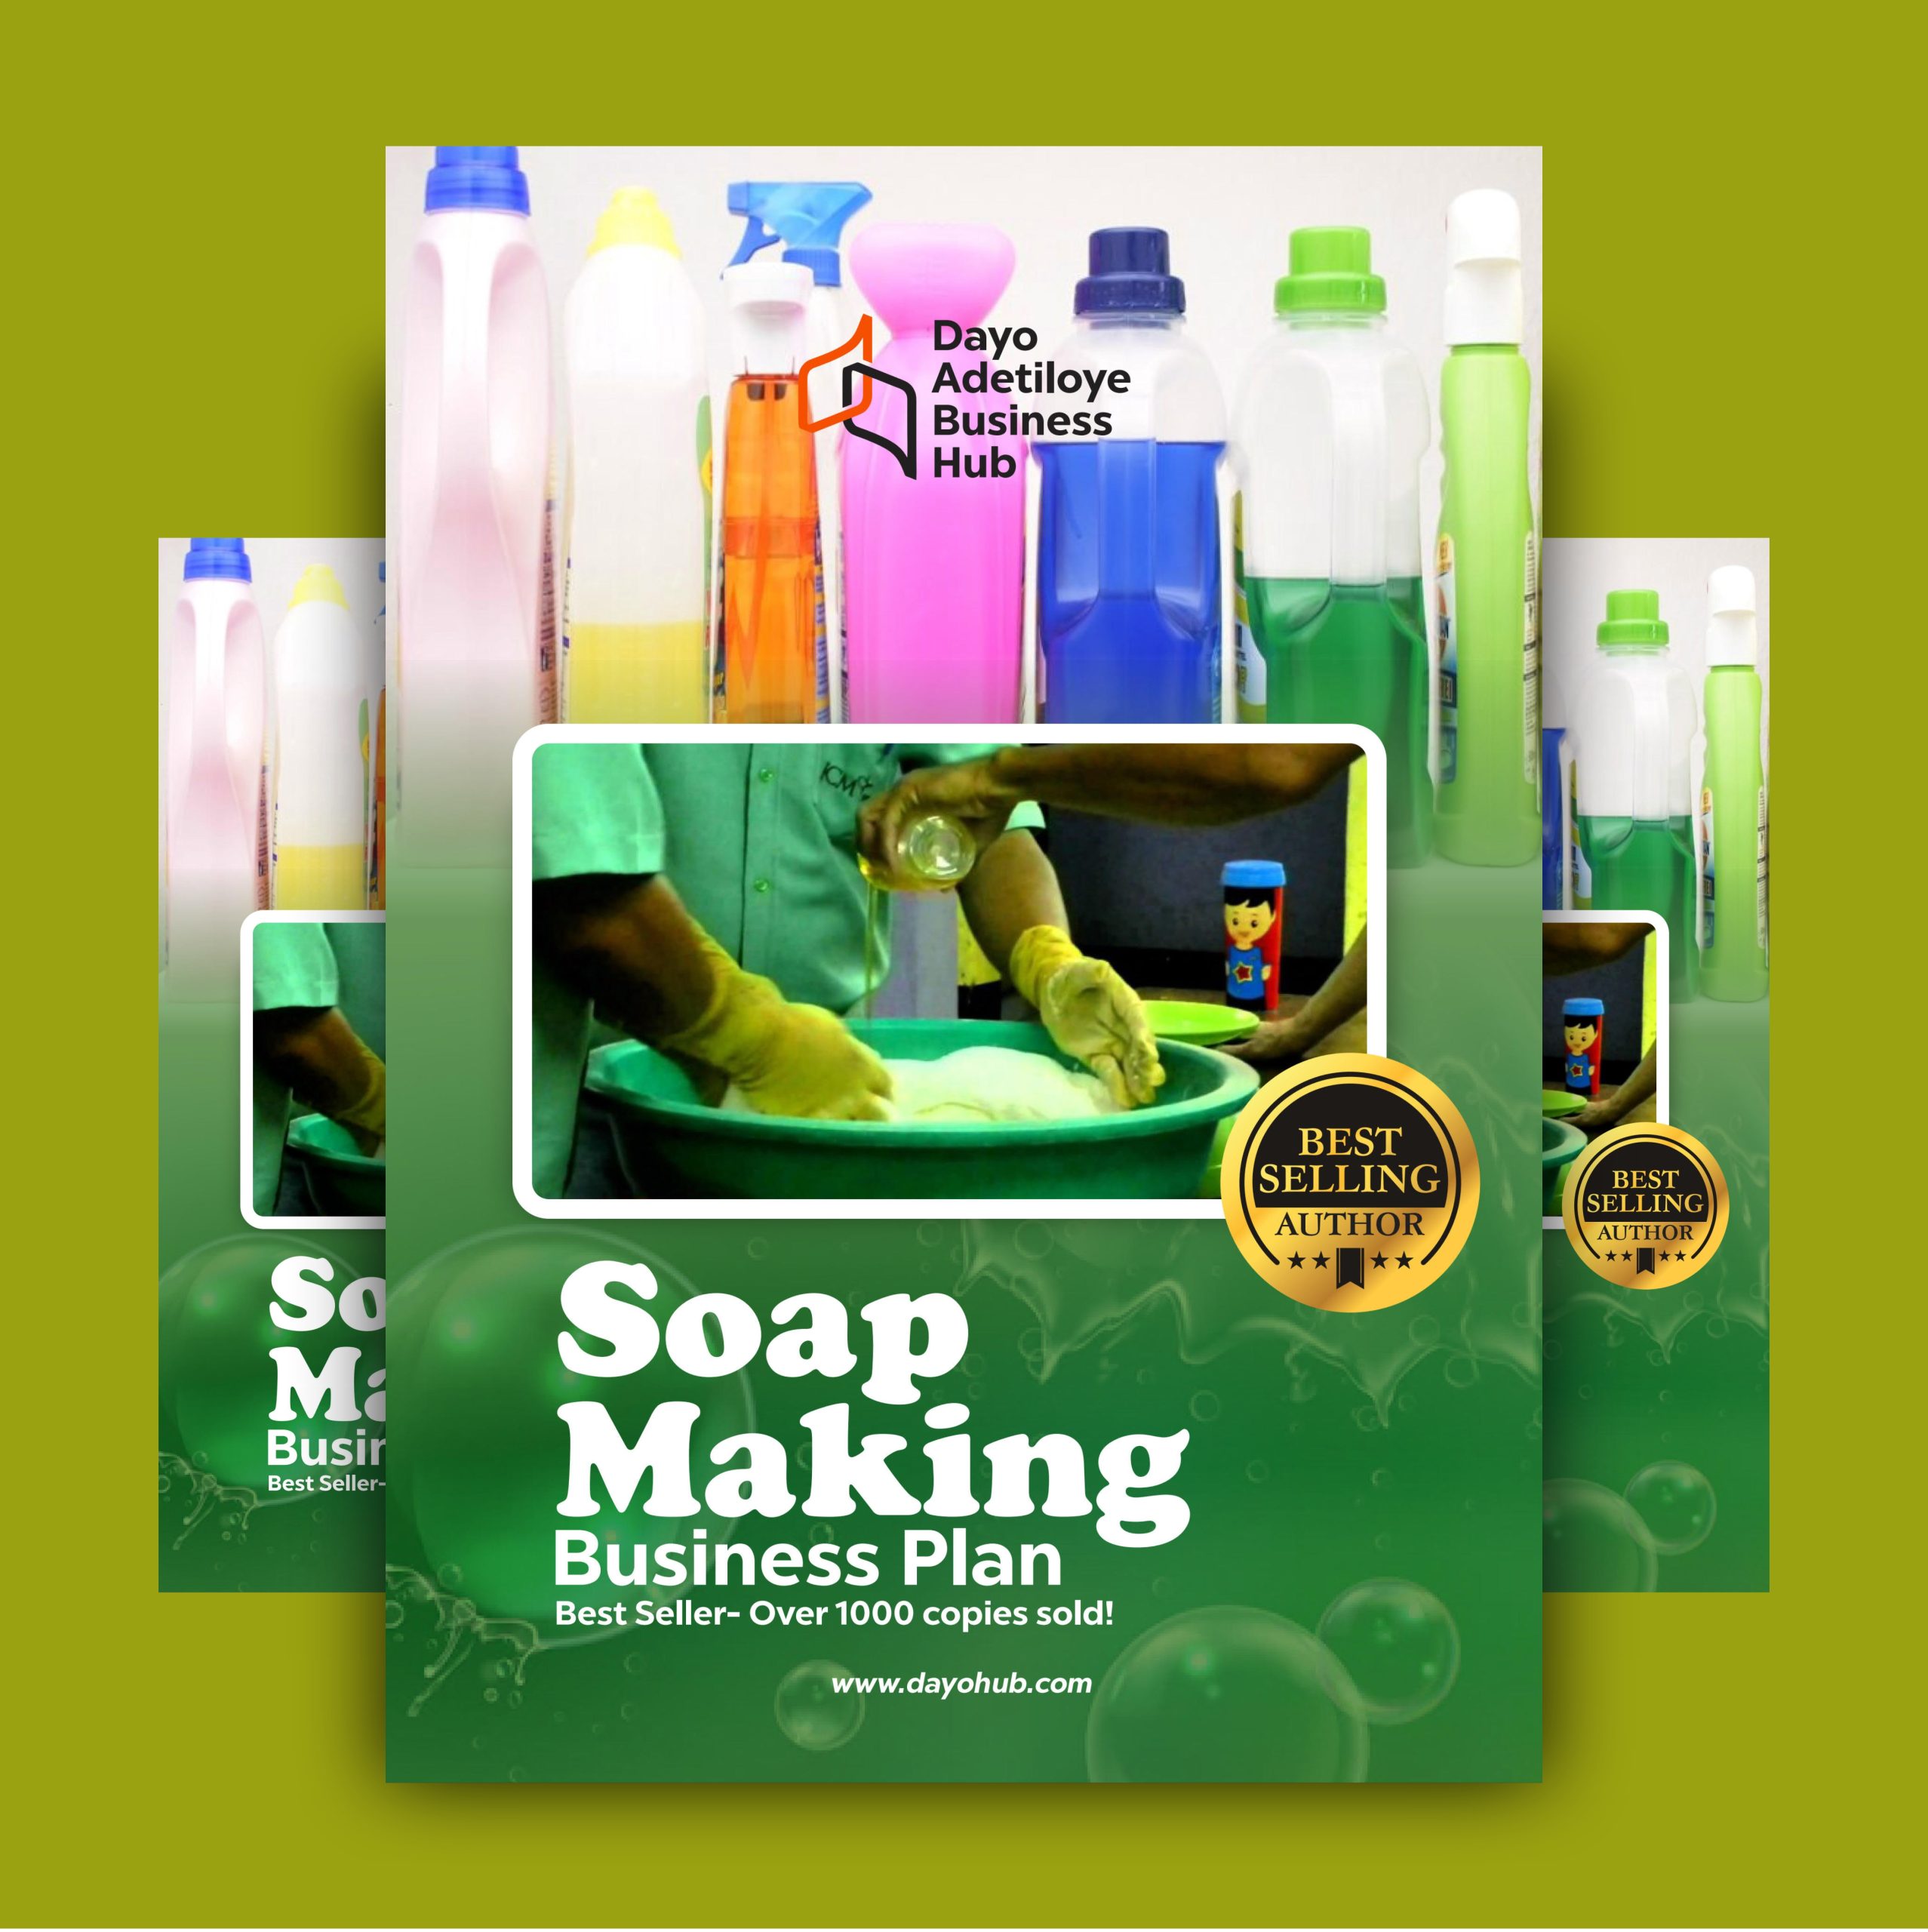 business plan on soap making in nigeria